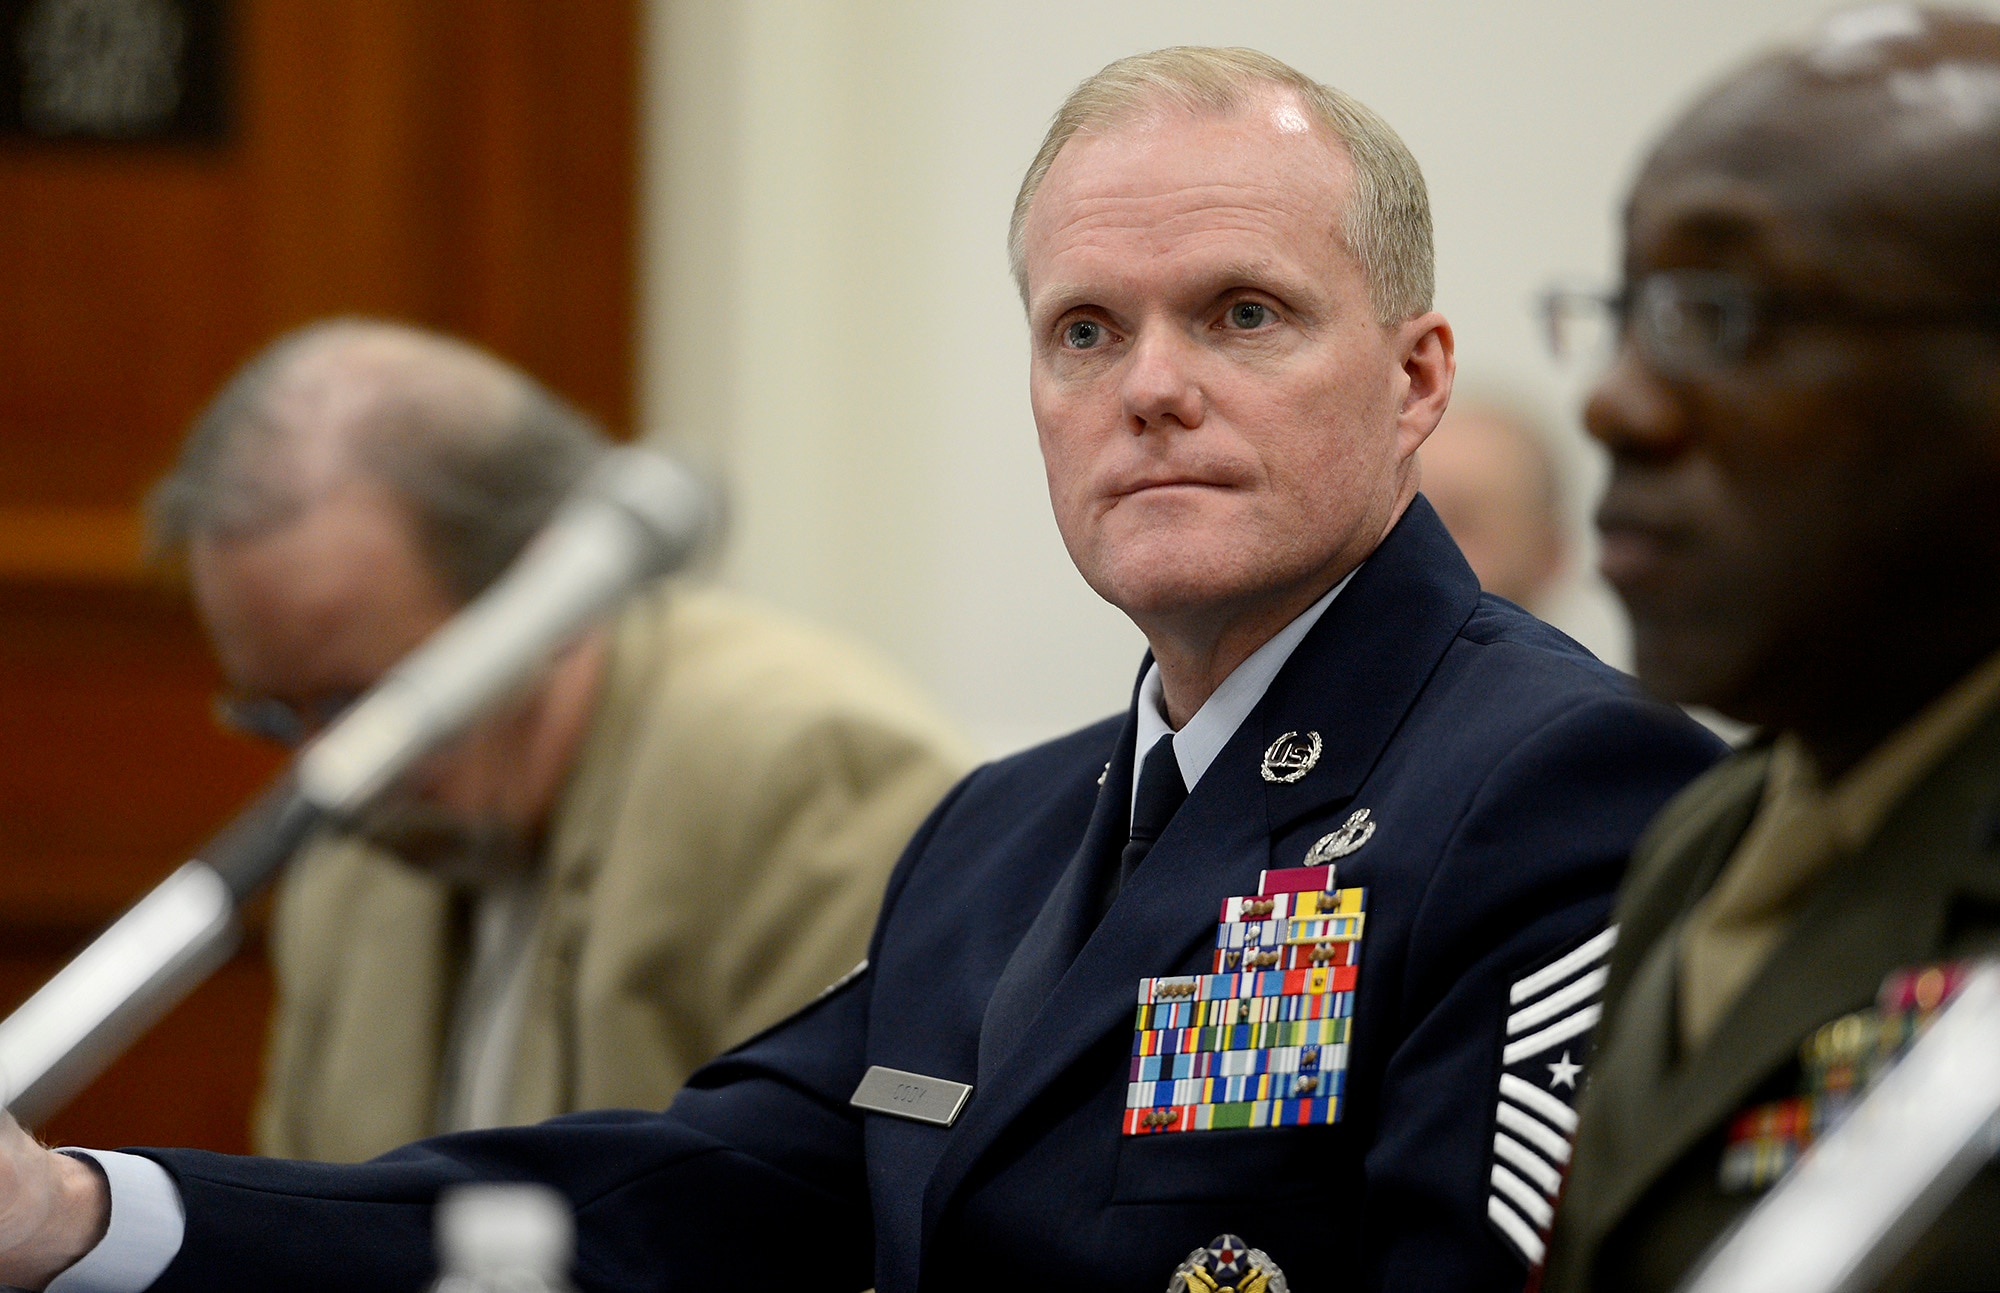 Chief Master Sgt. of the Air Force James A. Cody testifies before the House's Committee on Appropriations Subcommittee on Military Construction and Veterans Affairs Feb. 25, 2015, in Washington, D.C.  As part of his testimony, Cody spoke about the challenge of last year's force reductions and the impact of fiscal uncertainty on the force while facing global demands and geopolitical realities. In addition to Cody, the other witnesses were Sgt. Maj. of the Army Daniel A. Dailey, Master Chief Petty Office of the Navy Michael D. Stephens, and Sgt. Maj. of the Marine Corps Ronald Green. (U.S. Air Force photo/Scott M. Ash)